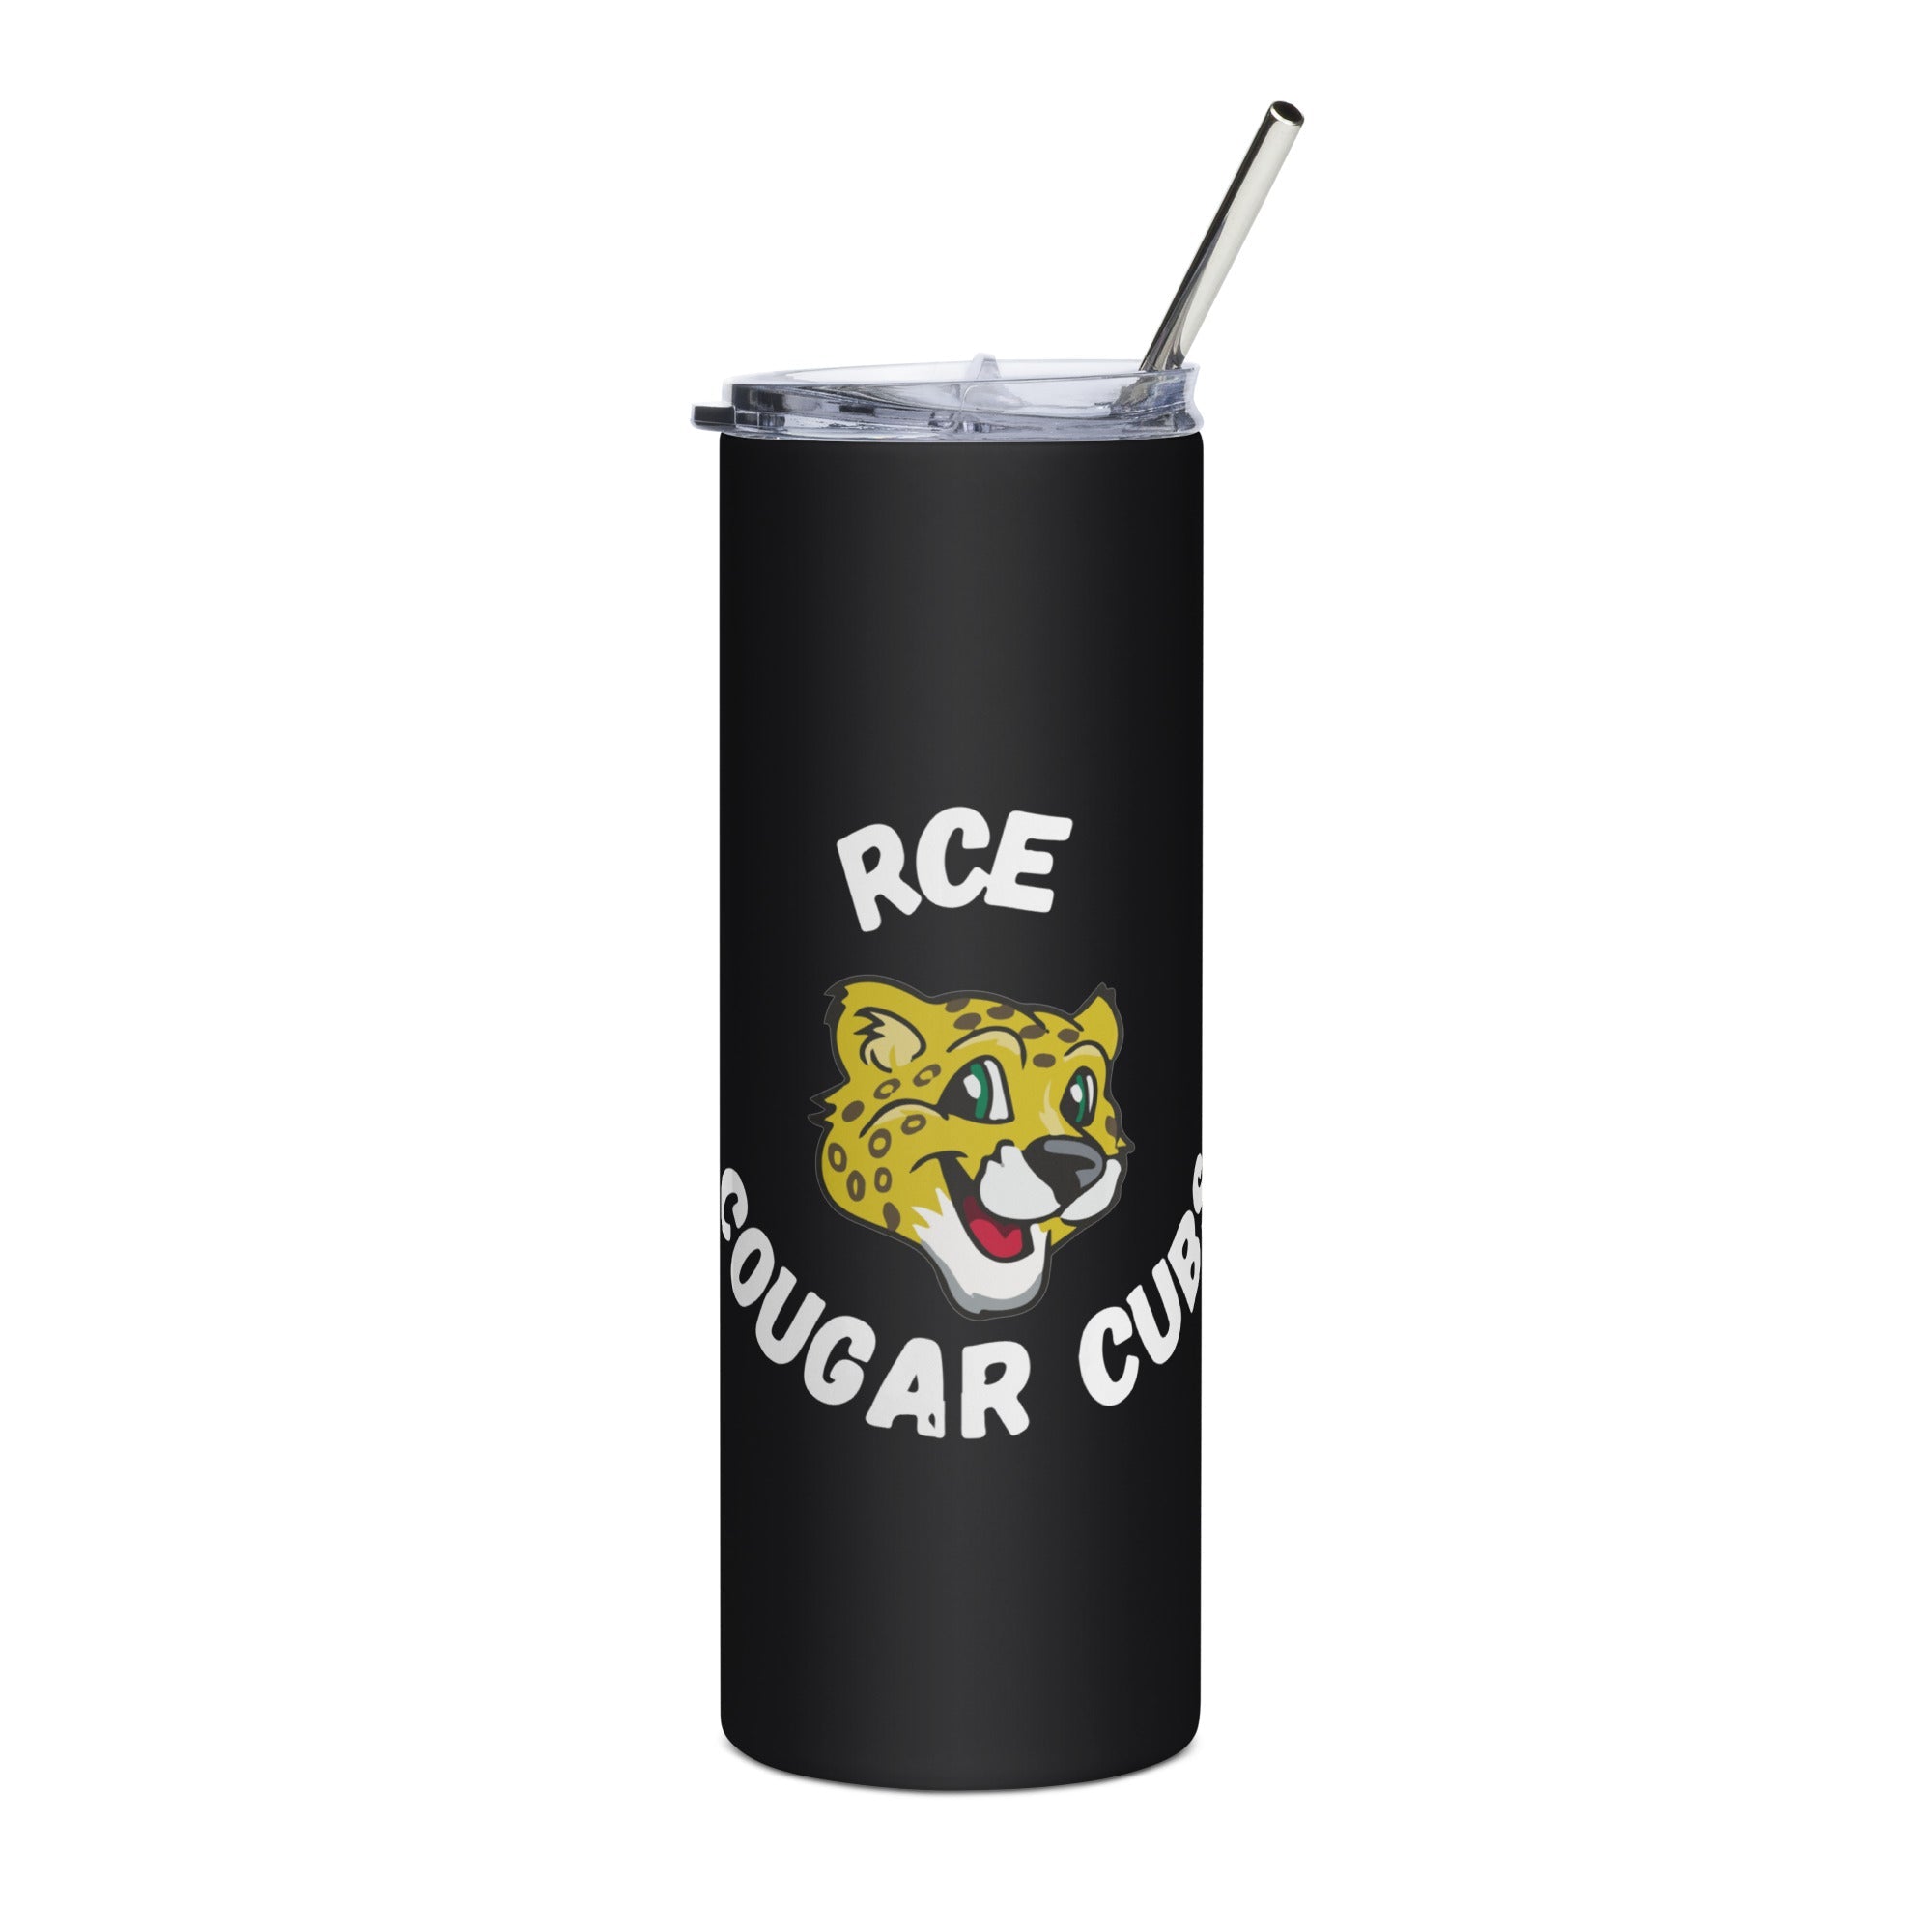 RCES Stainless steel tumbler